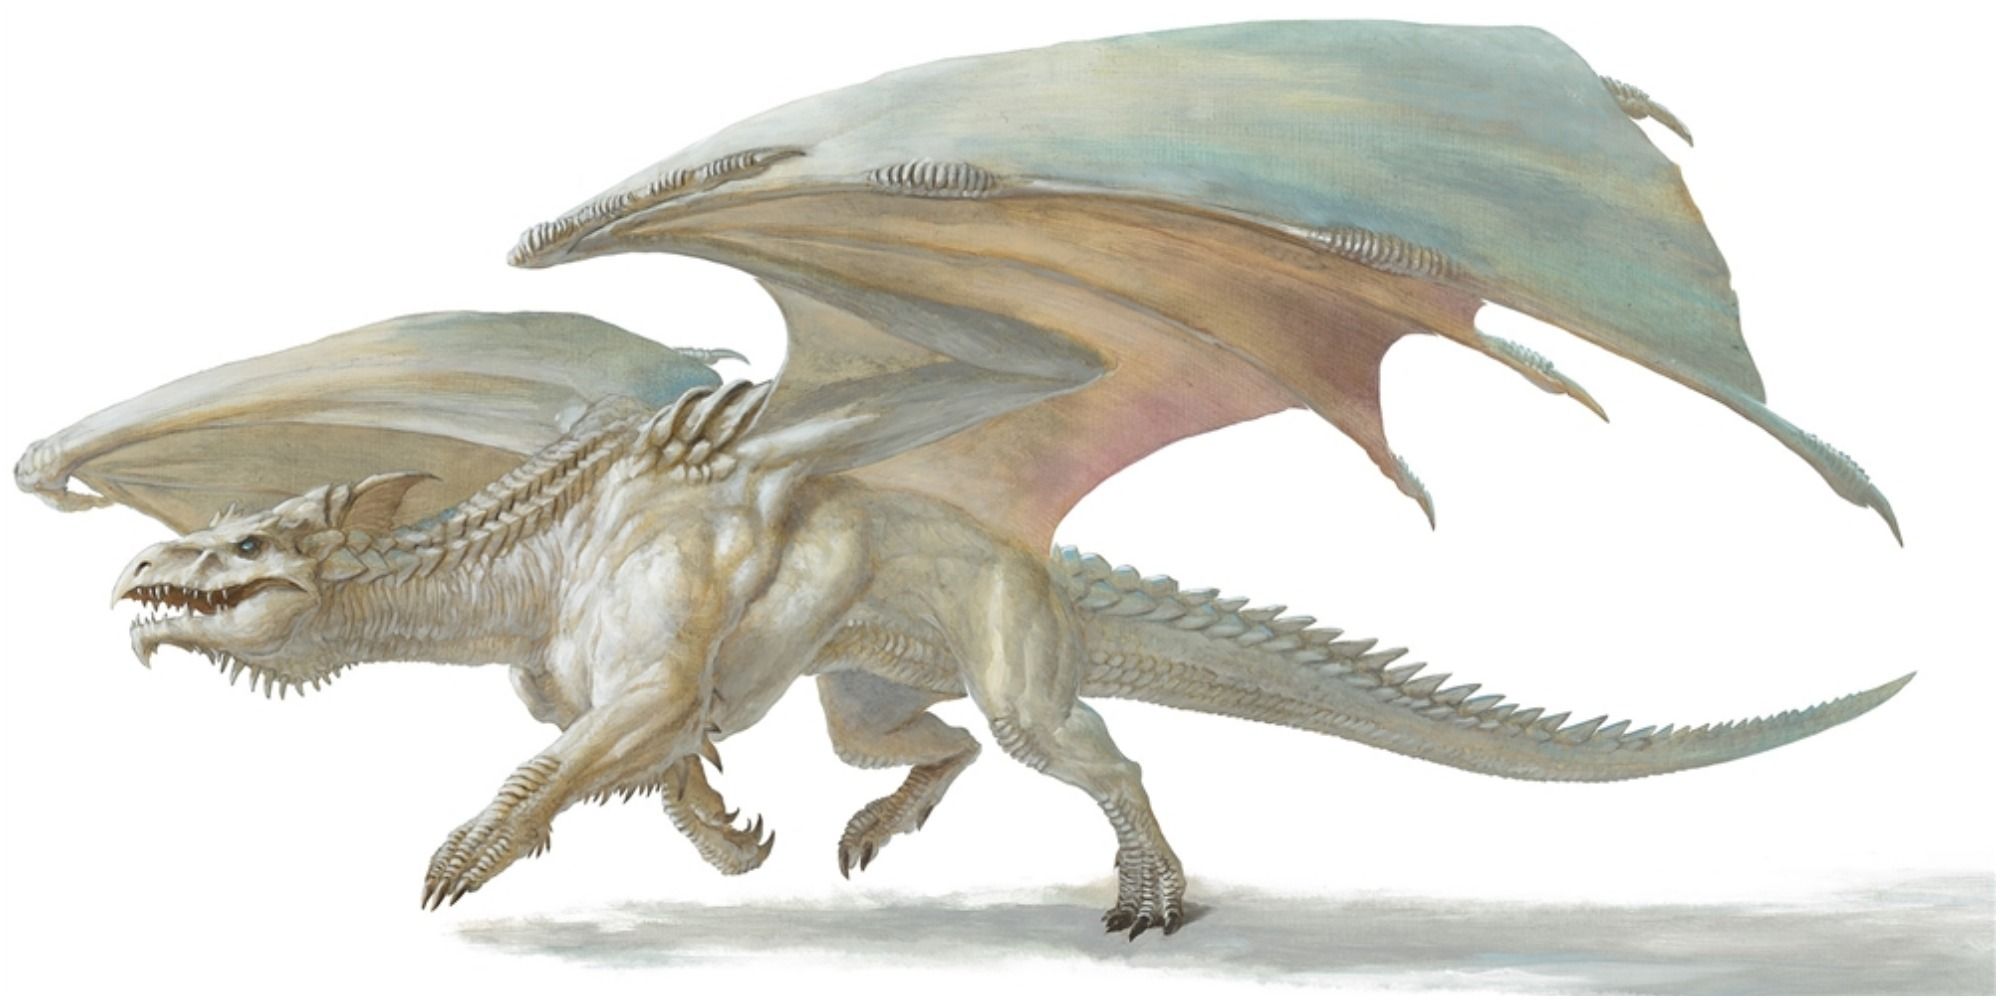 An image of an Ancient White Dragon from DnD